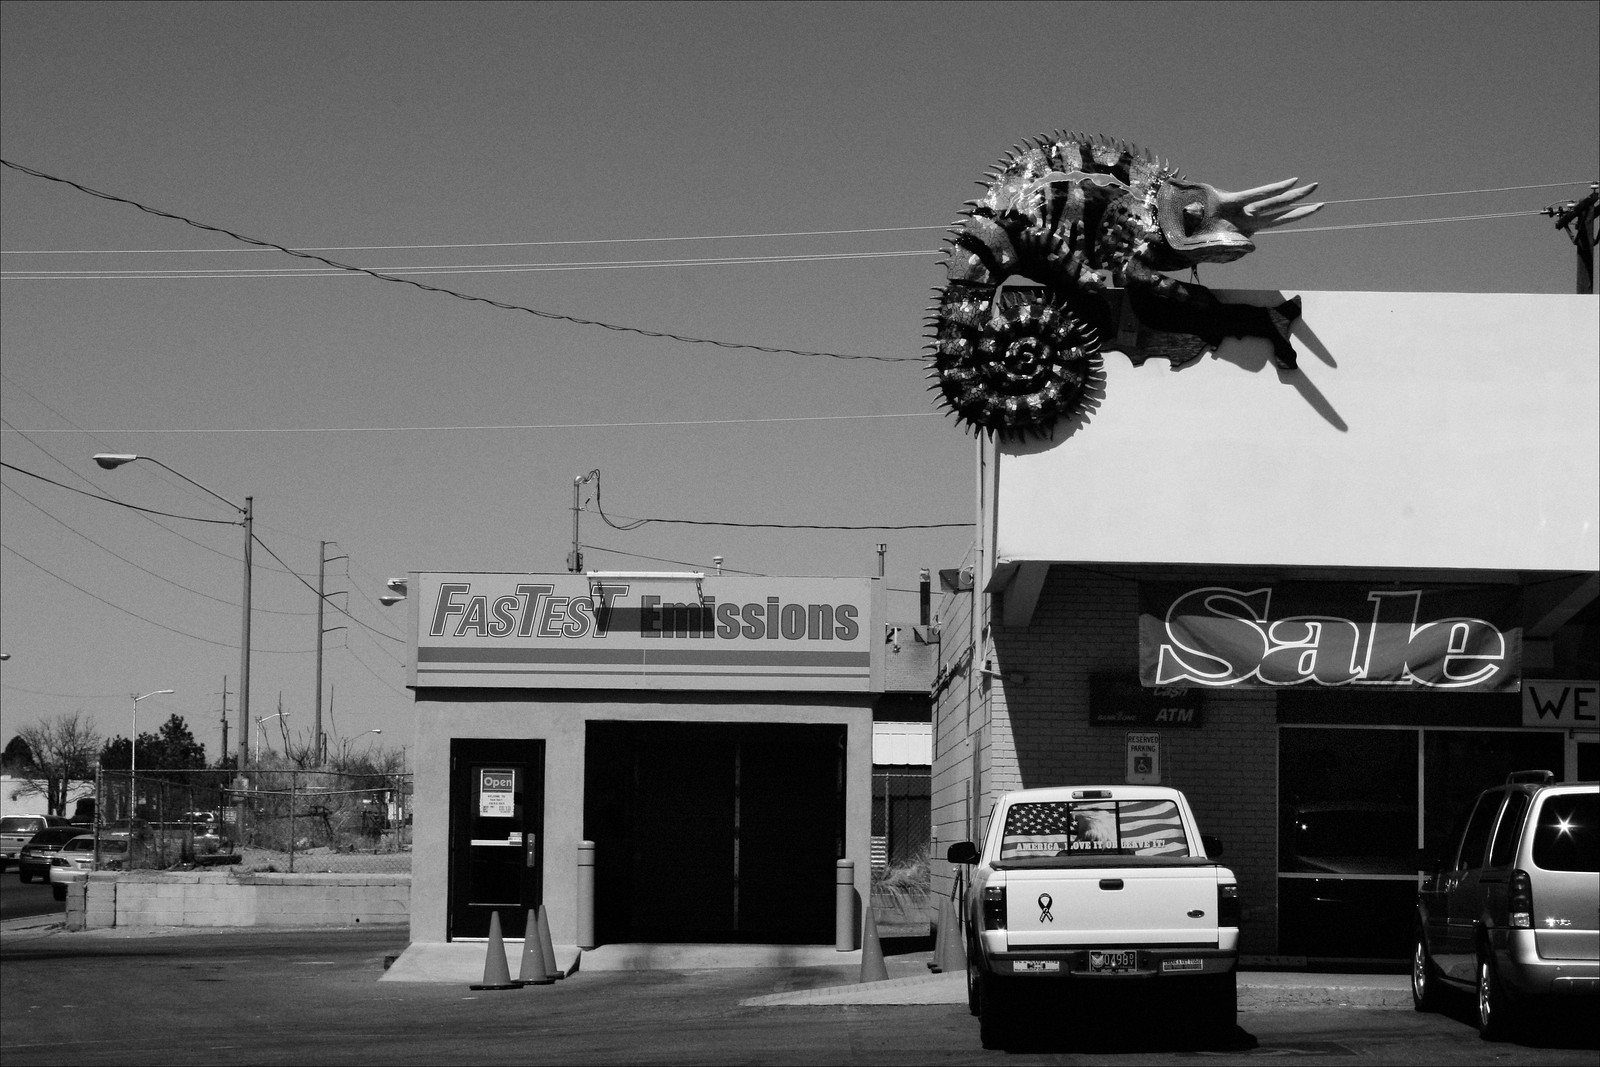 America, Love it or Leave it, New Mexico, 2008